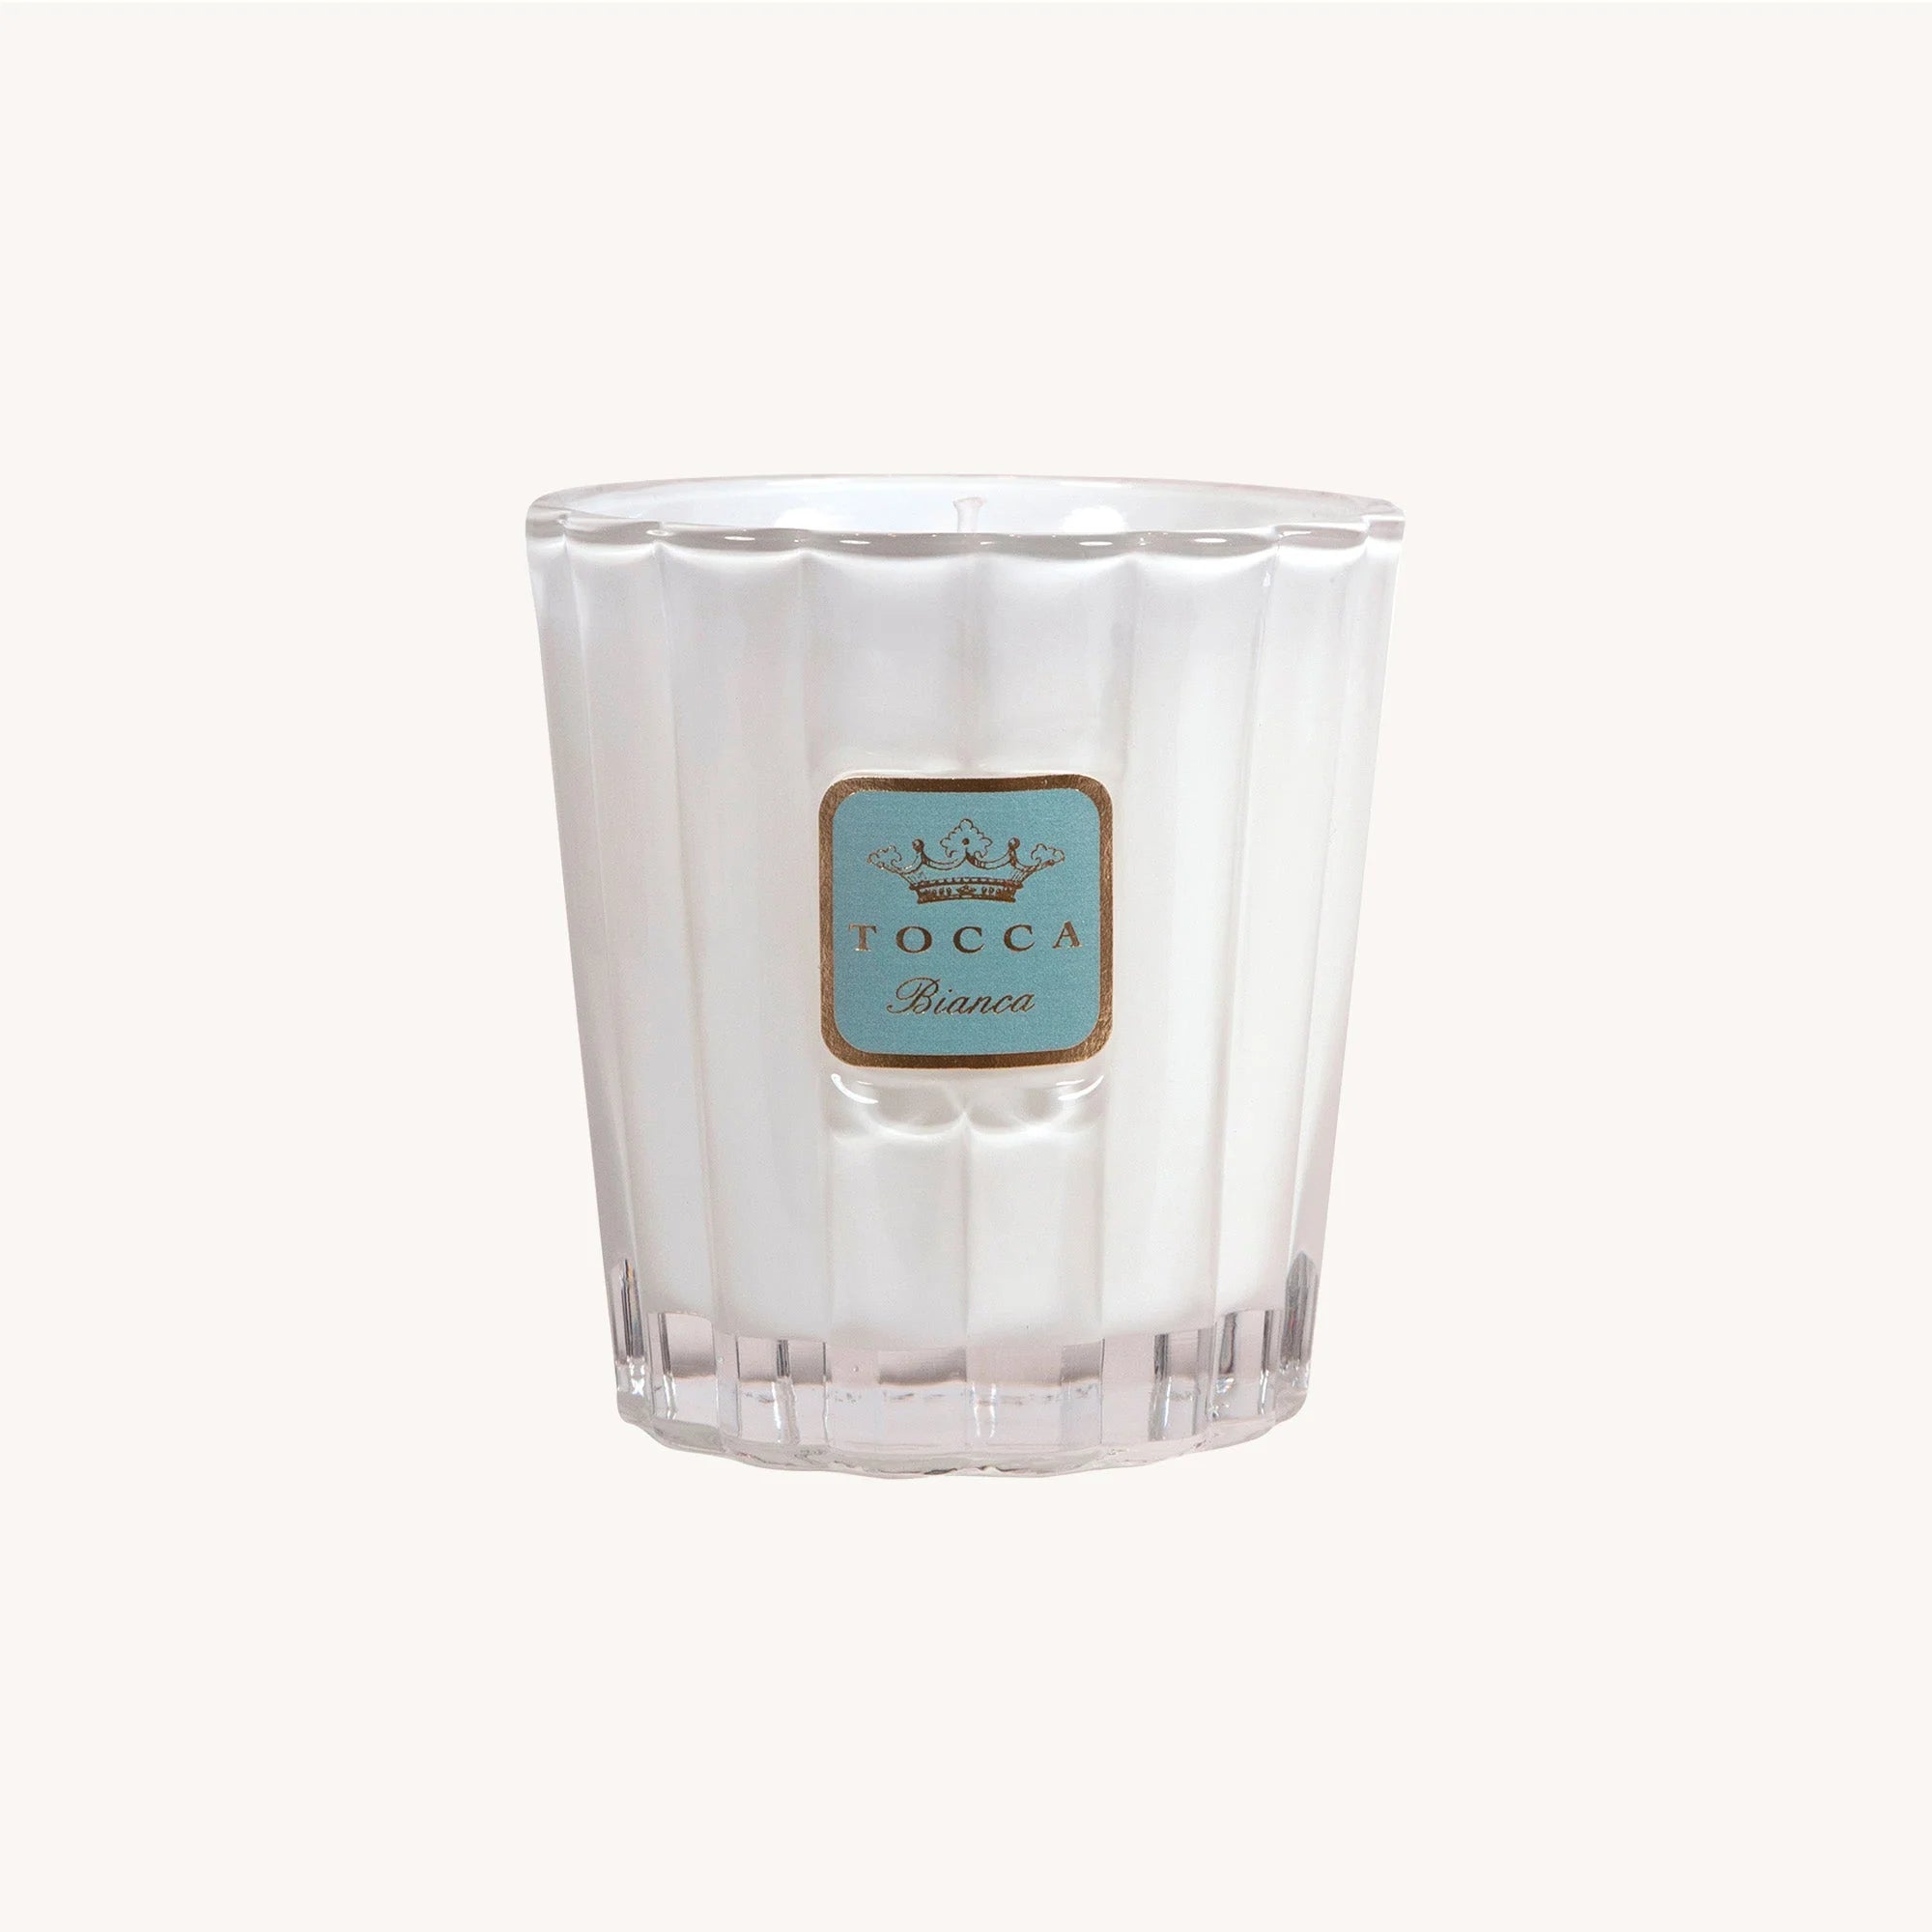 Tocca Candela Bianca Scented Candle – 10oz.